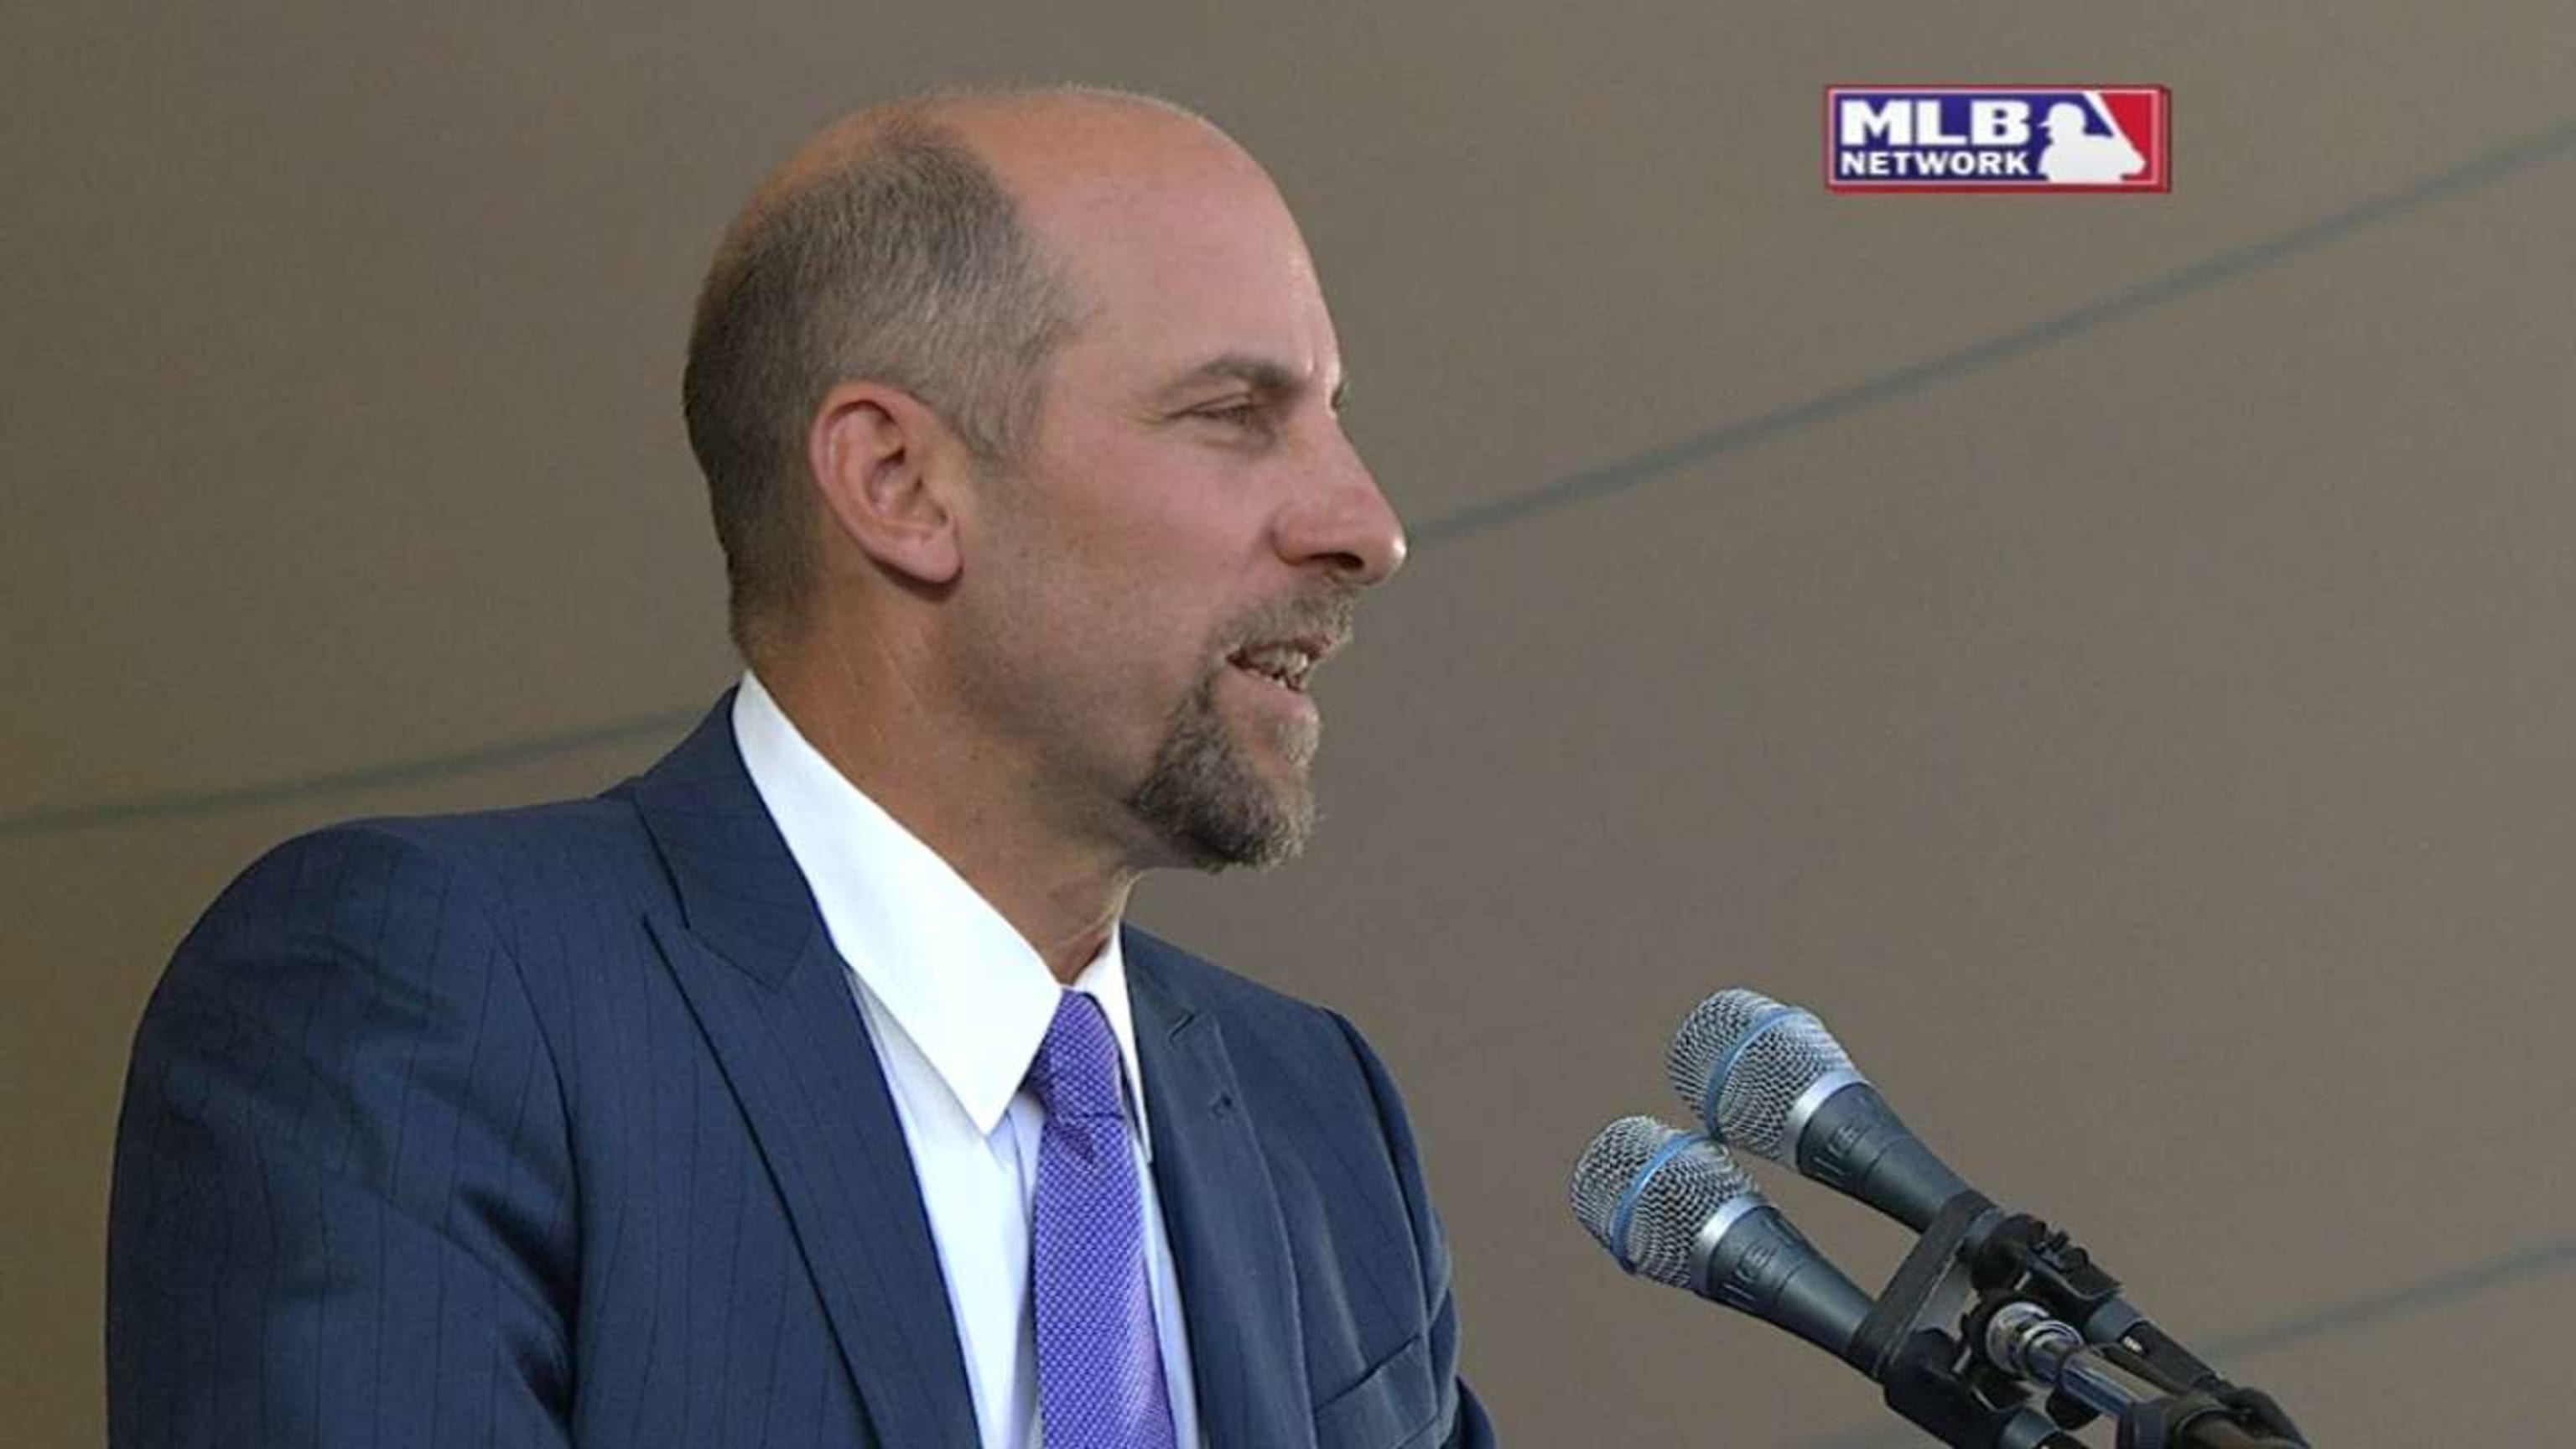 MLB Legend John Smoltz Wants to Compete at PGA Tour Champions After Hip  Surgery, News, Scores, Highlights, Stats, and Rumors